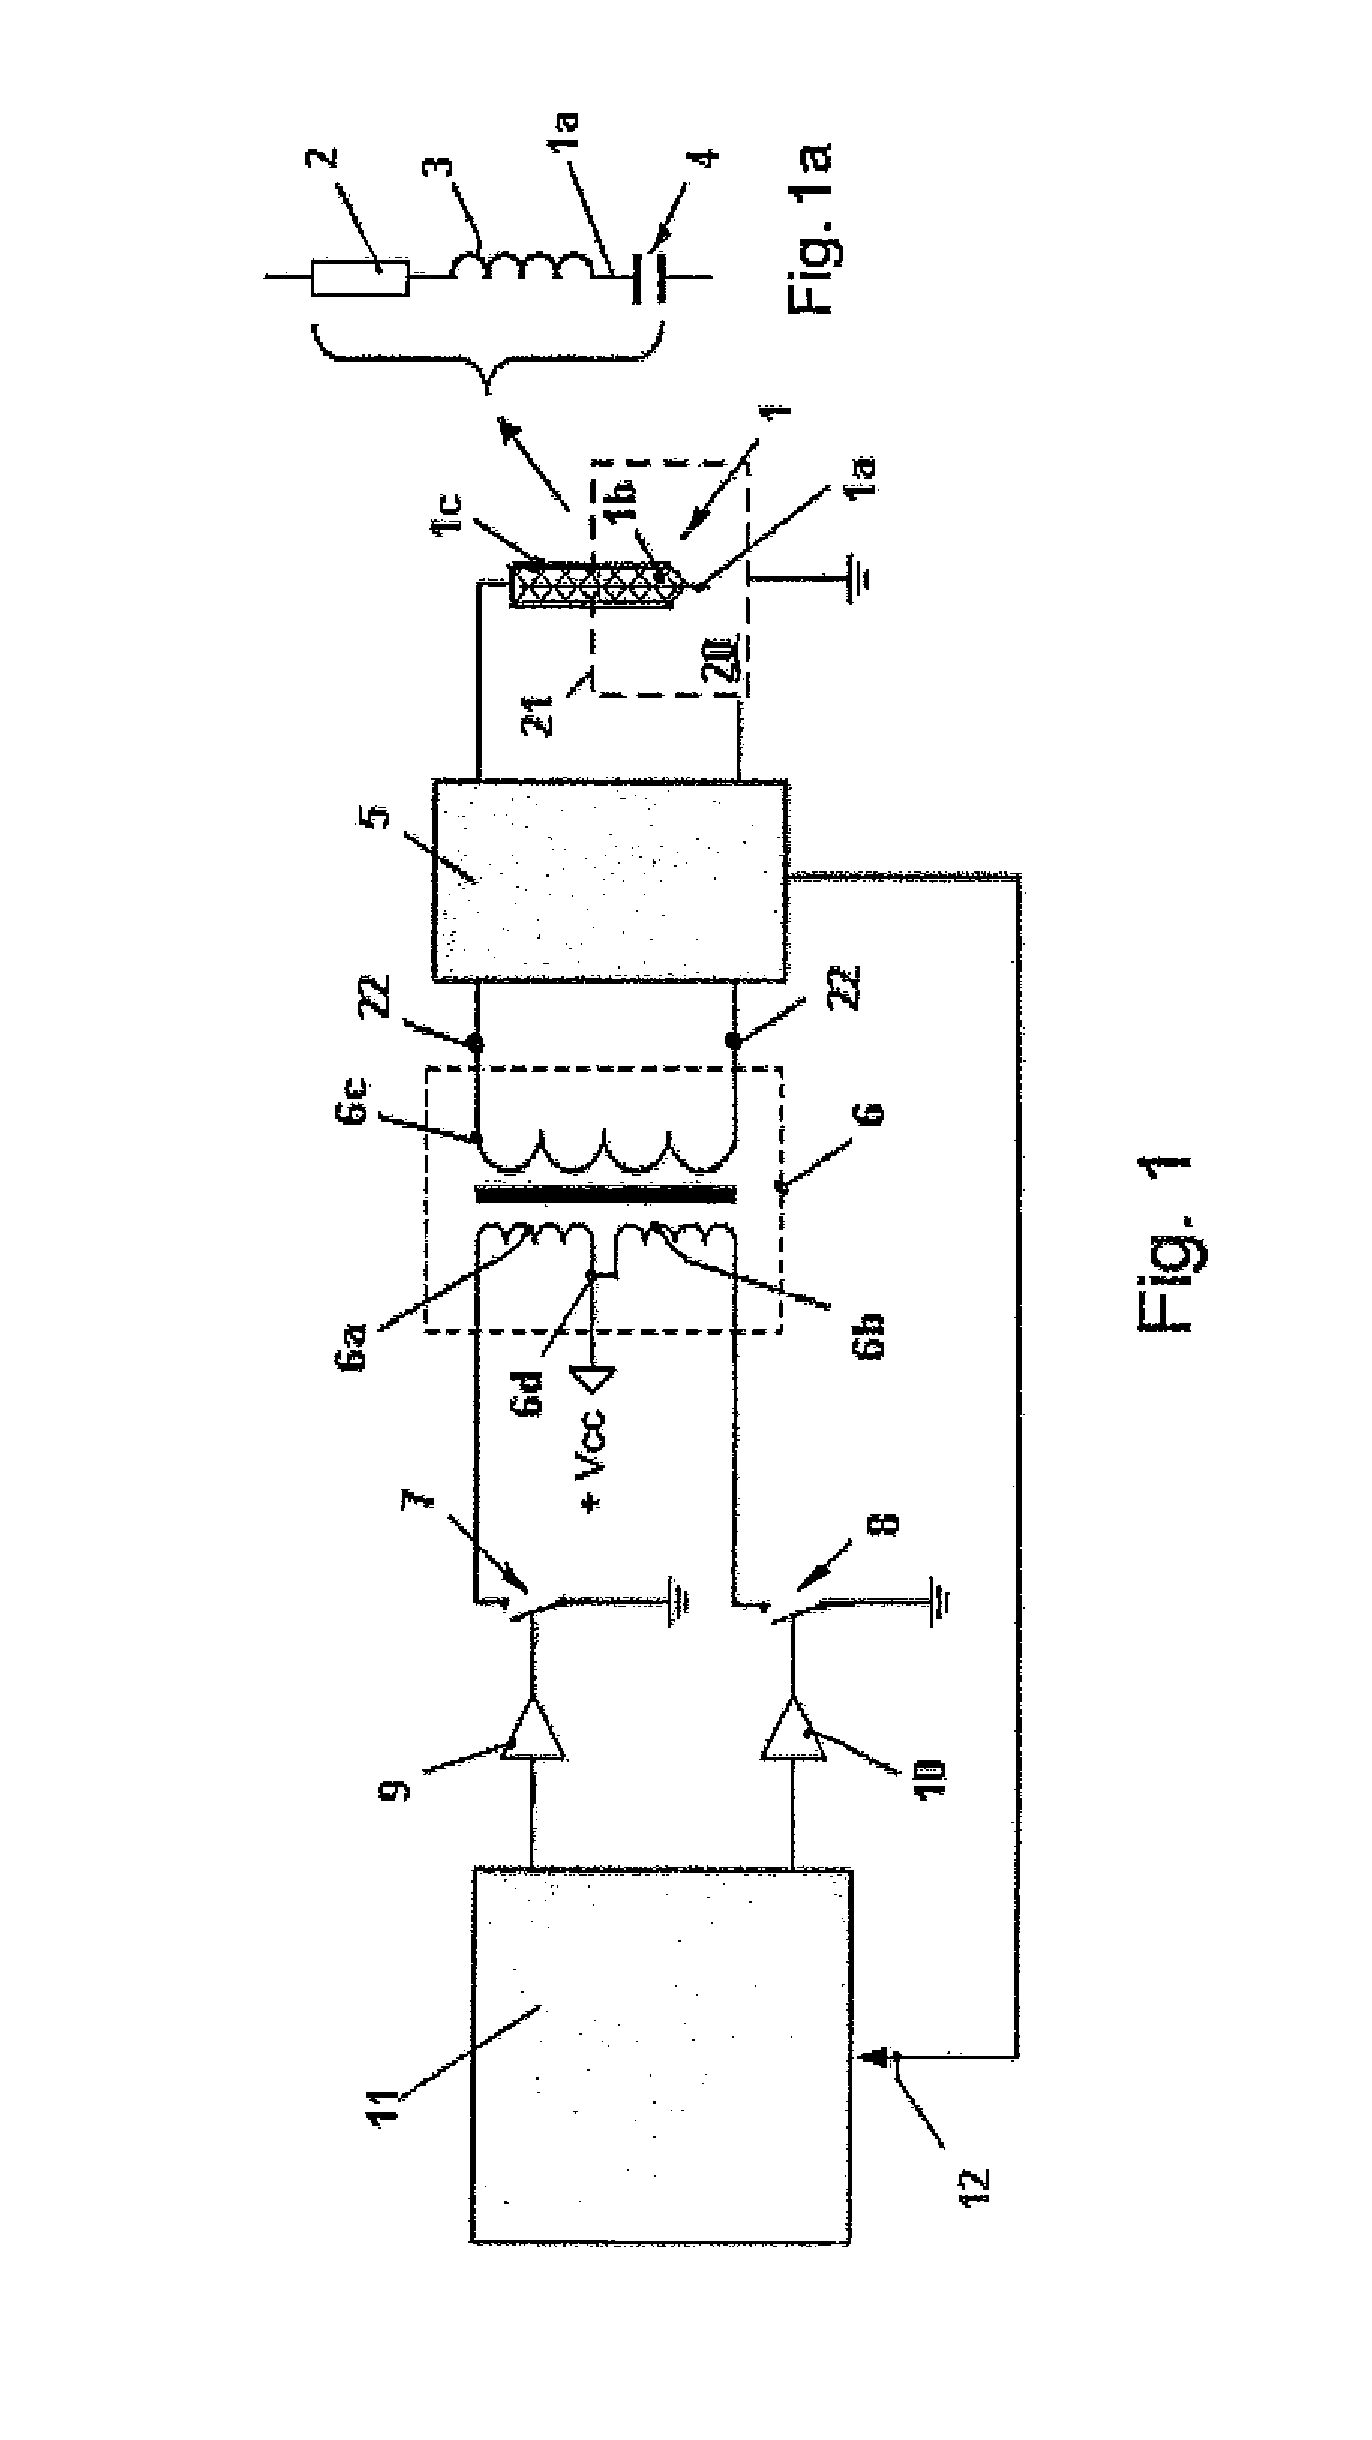 Method for energizing an HF resonant circuit which has an igniter as a component for igniting a fuel-air mixture in a combustion chamber